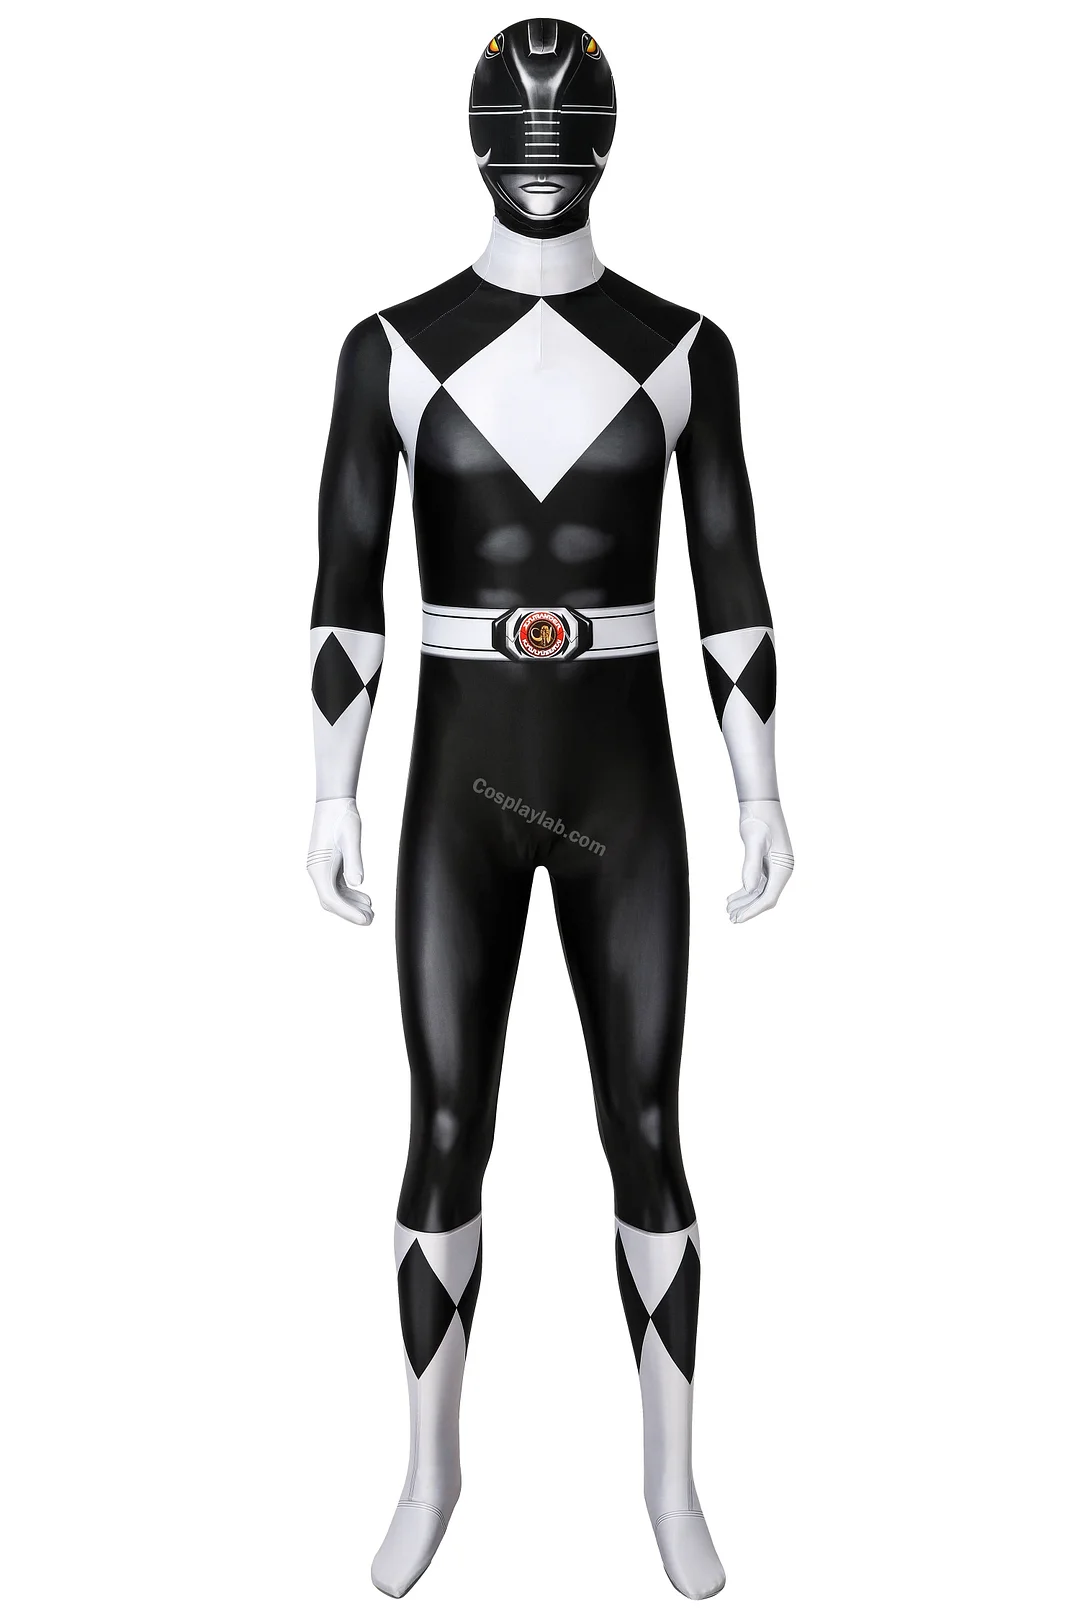 Black Power Rangers Cosplay Costume HQ Printed Spandex Suit Jumpsuit Edition By CosplayLab